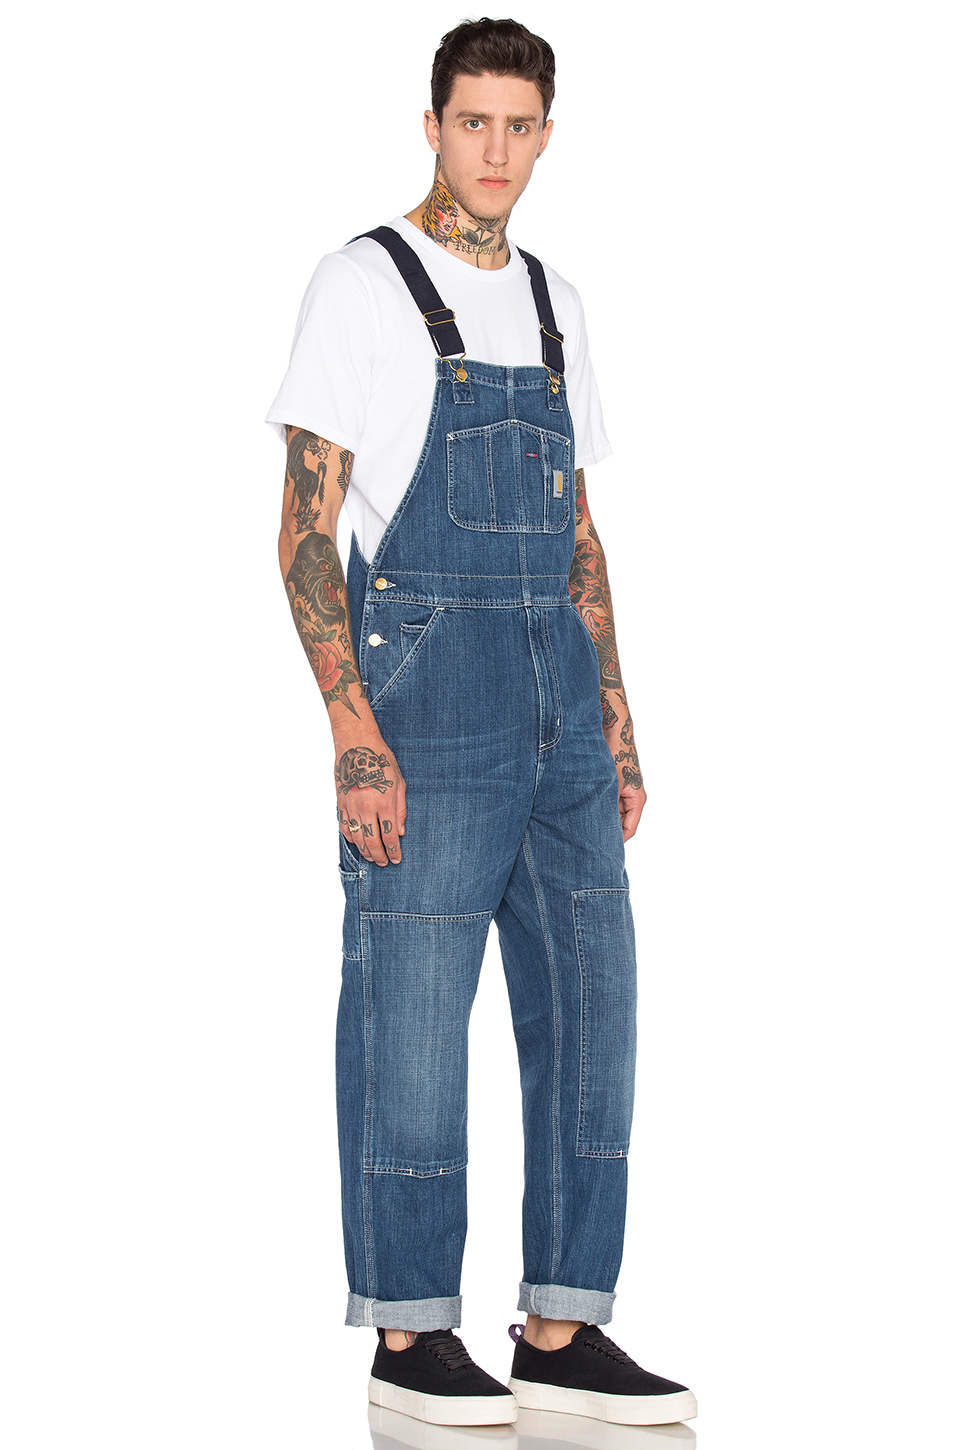 Carhartt WIP Cotton Bib Overall in Blue for Men - Lyst